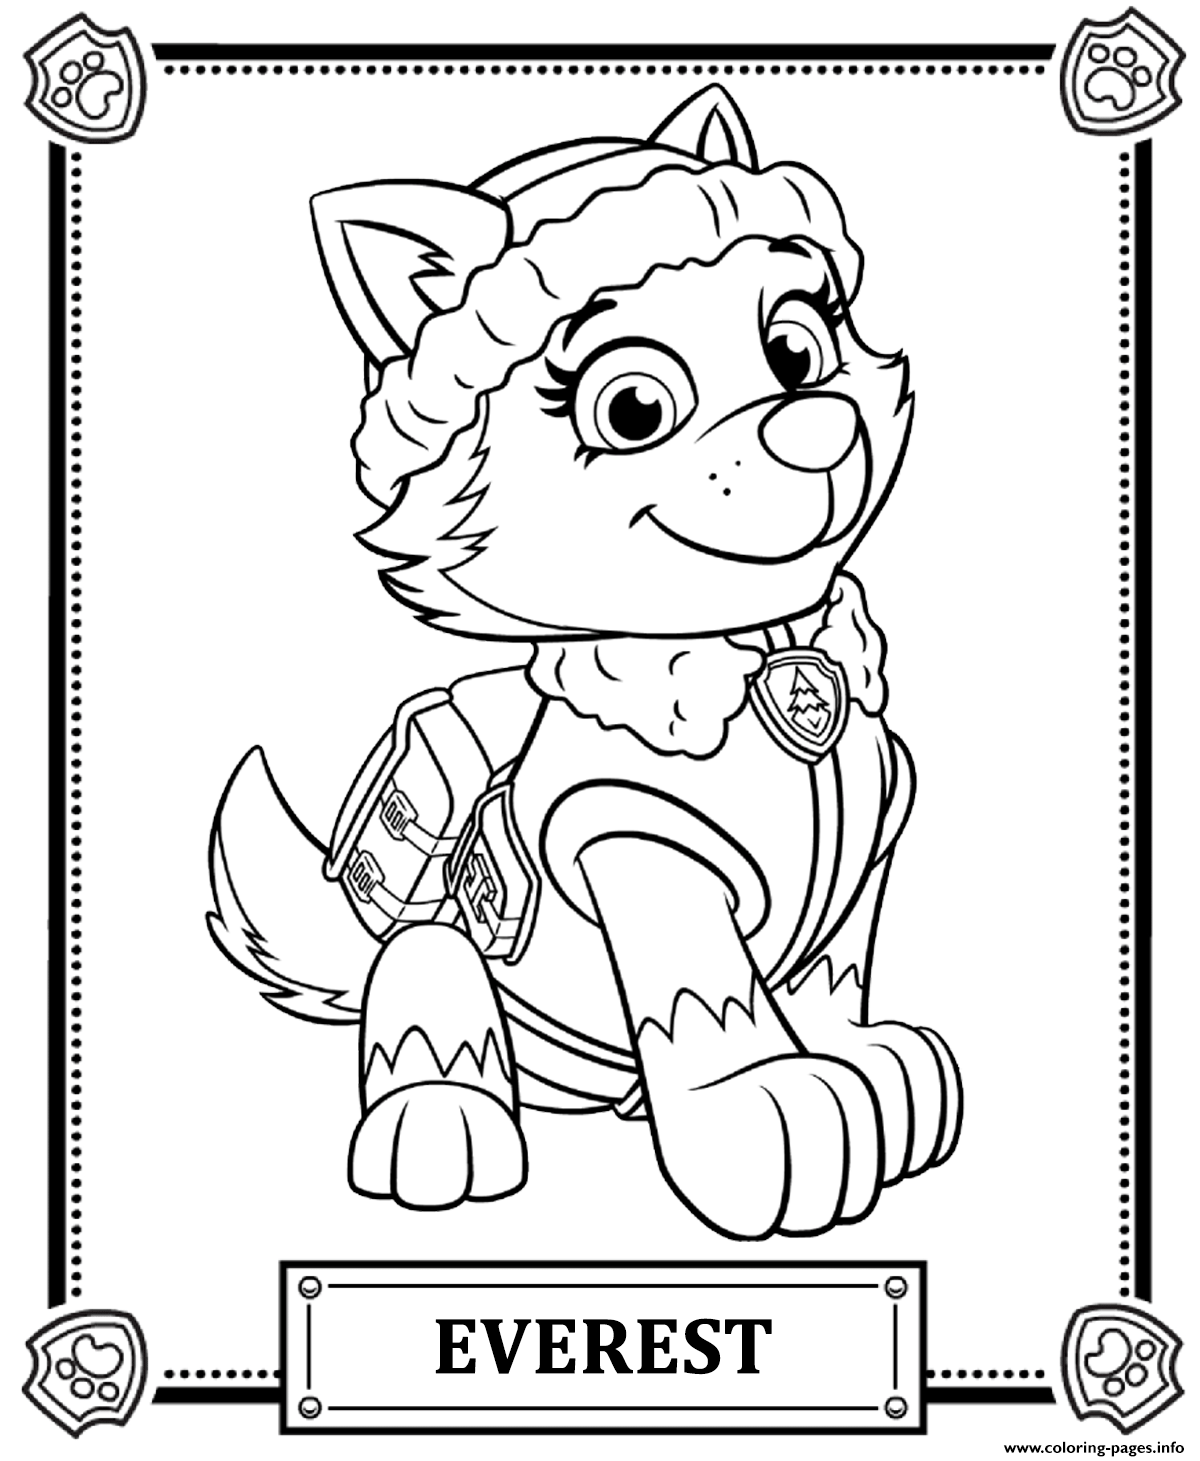 Paw Patrol Everest coloring pages